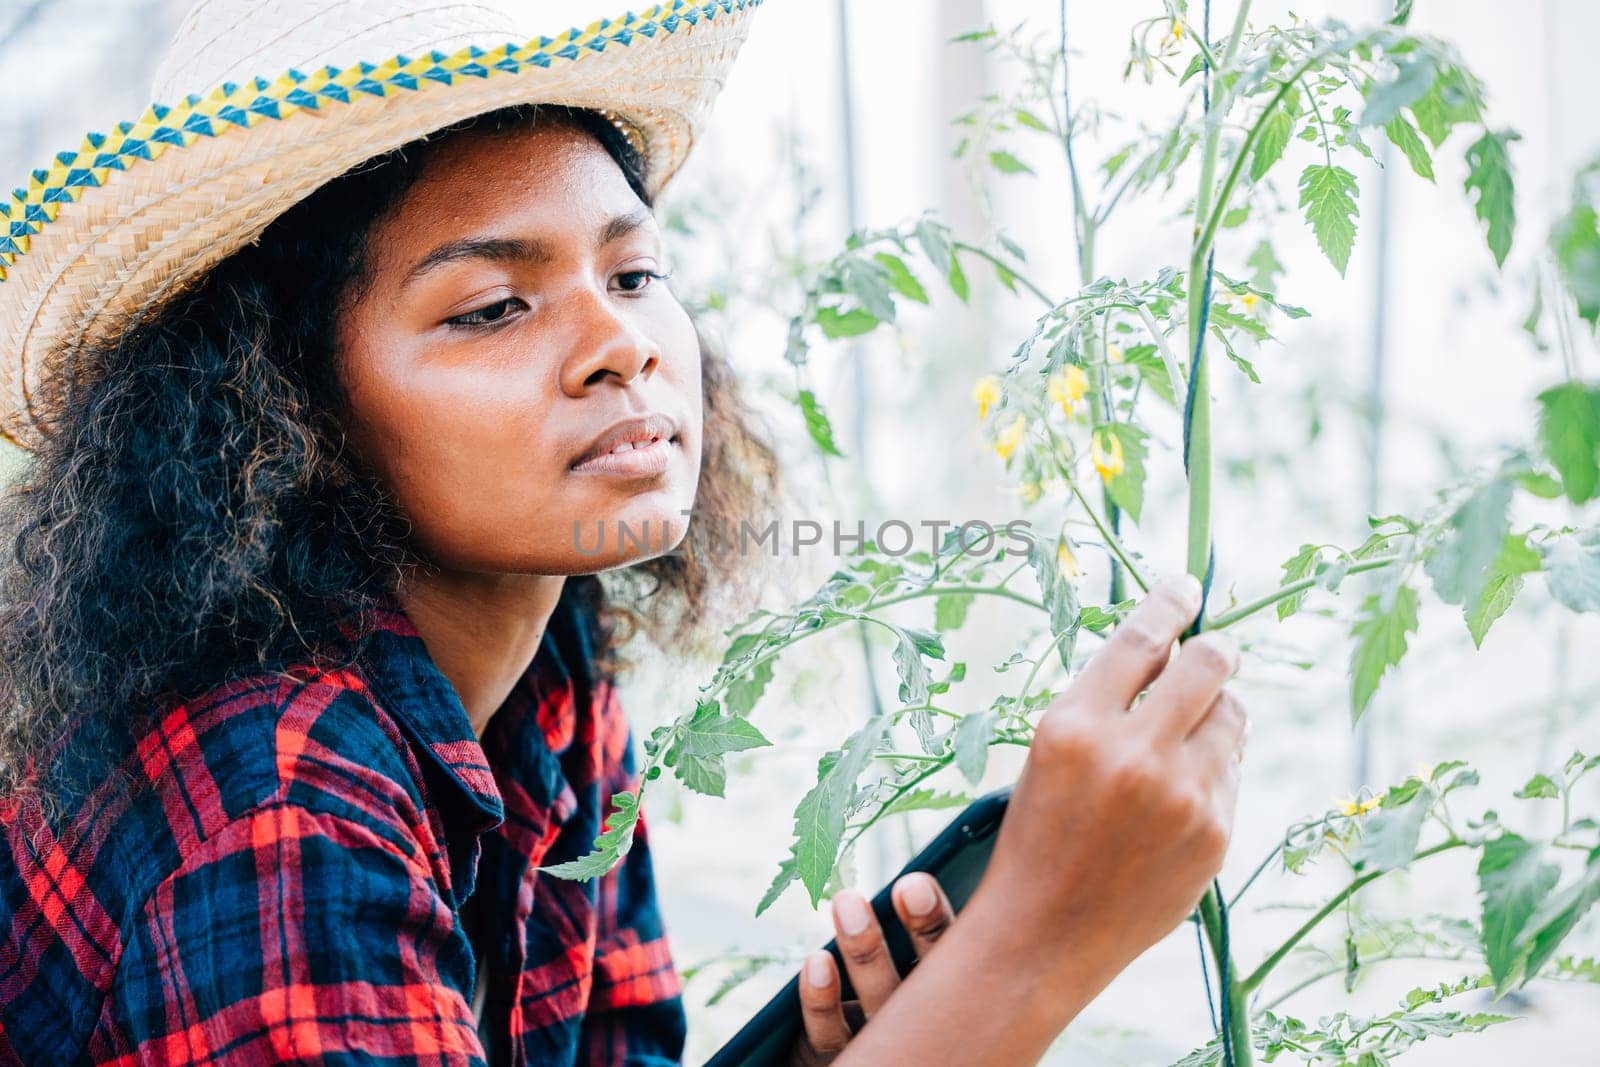 Agricultural innovation captured a farmer with a tablet inspects tomatoes in a controlled environment. Quality control and modern techniques ensure optimal growth. Nature meets technology.